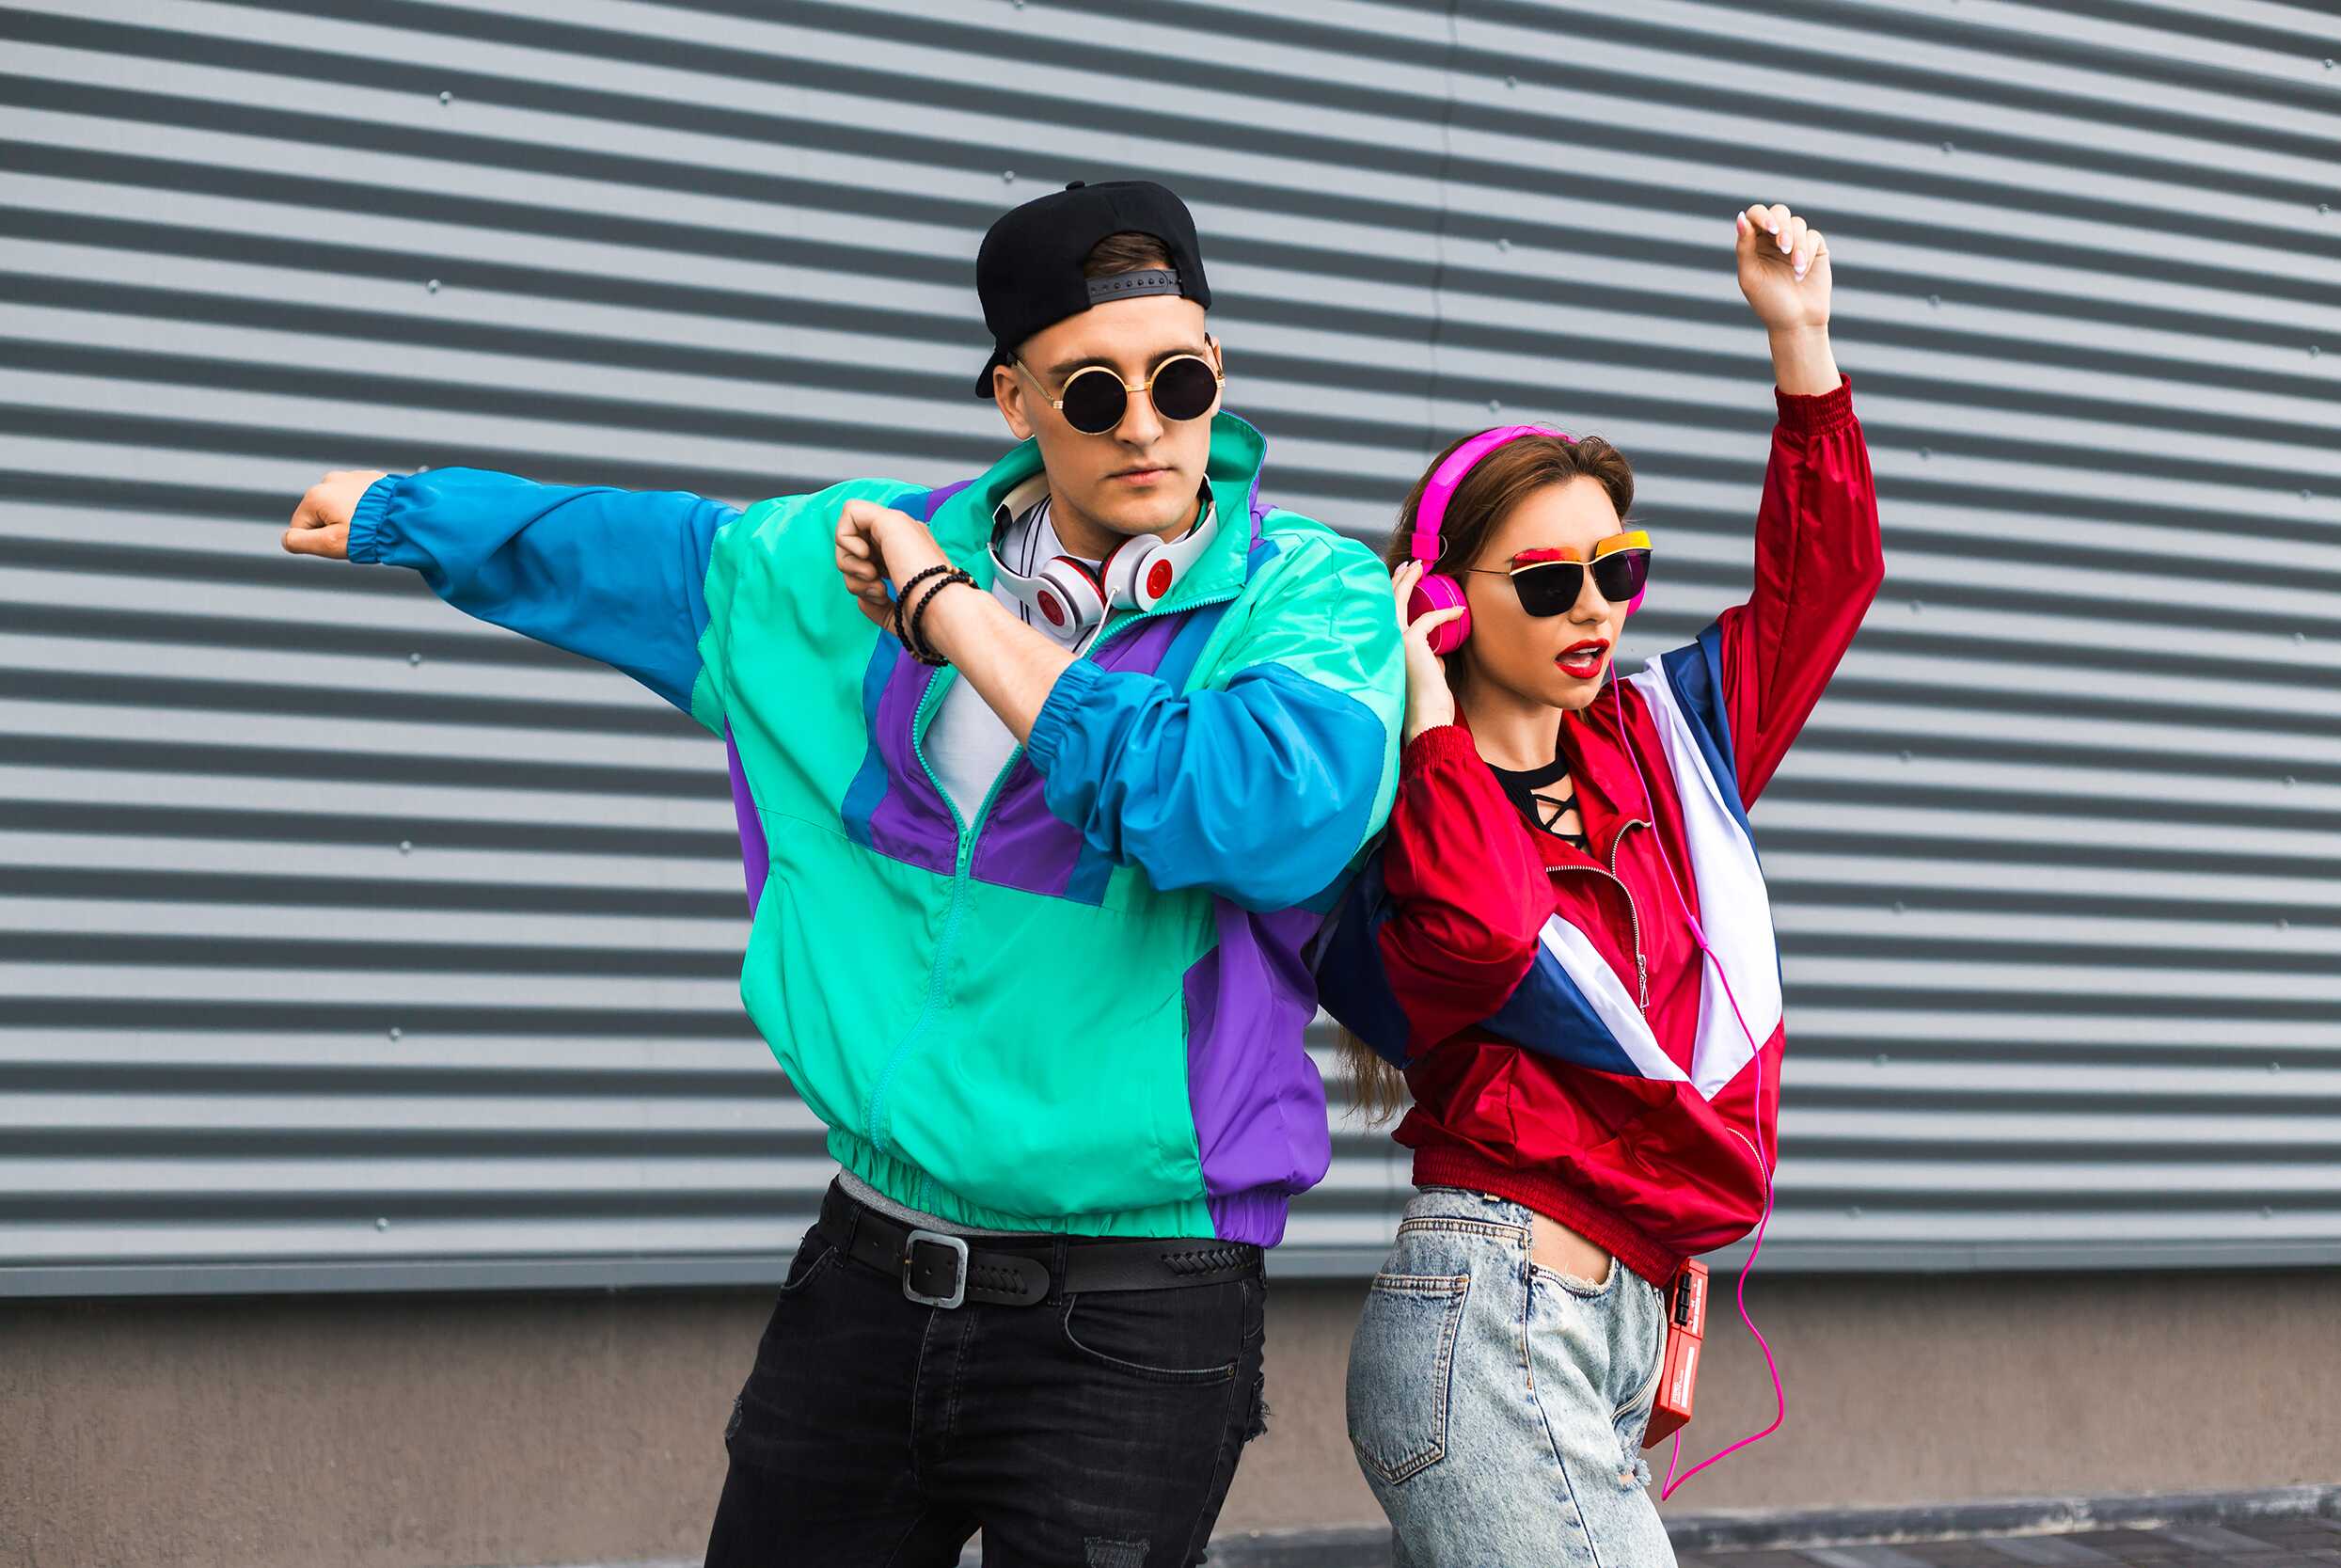 90S Theme Party Ideas, Outfits, Decorations And Music - The Bash